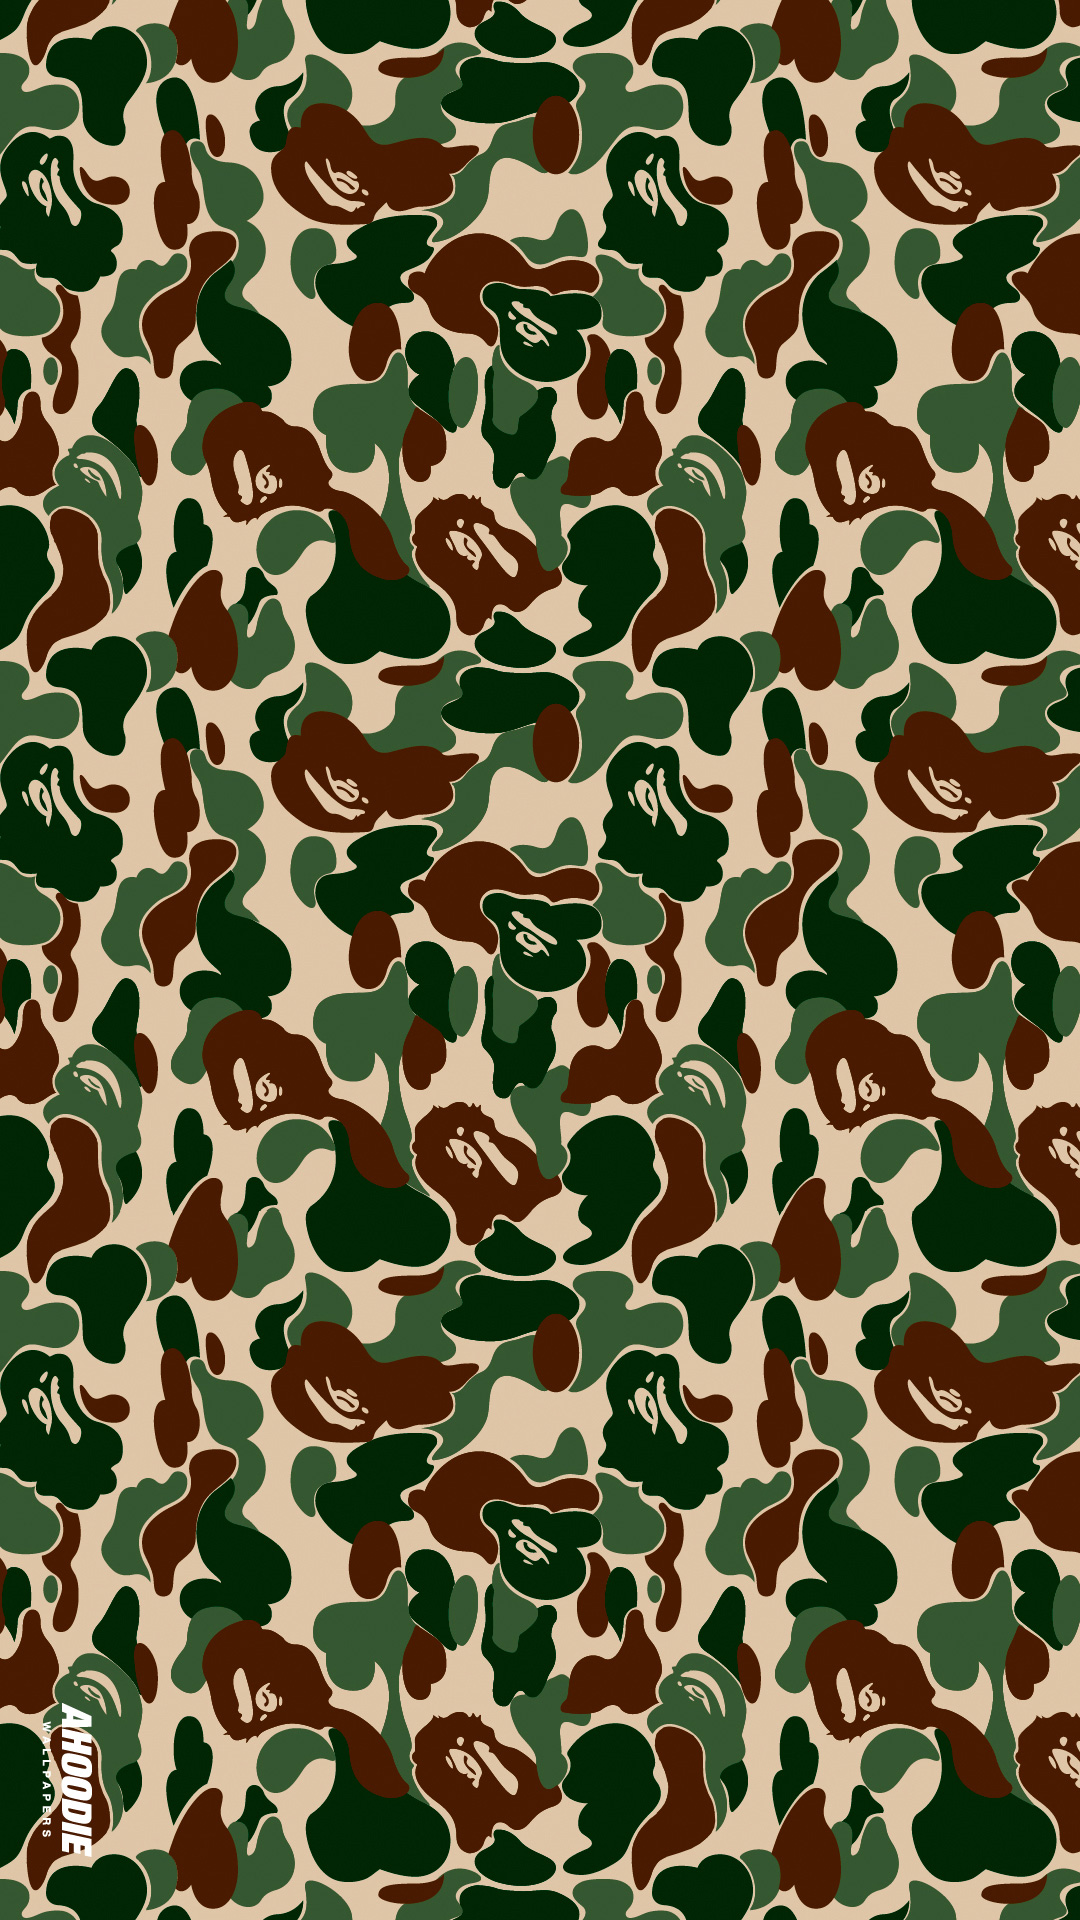 bape wallpaper, green, pattern, military camouflage, brown, camouflage